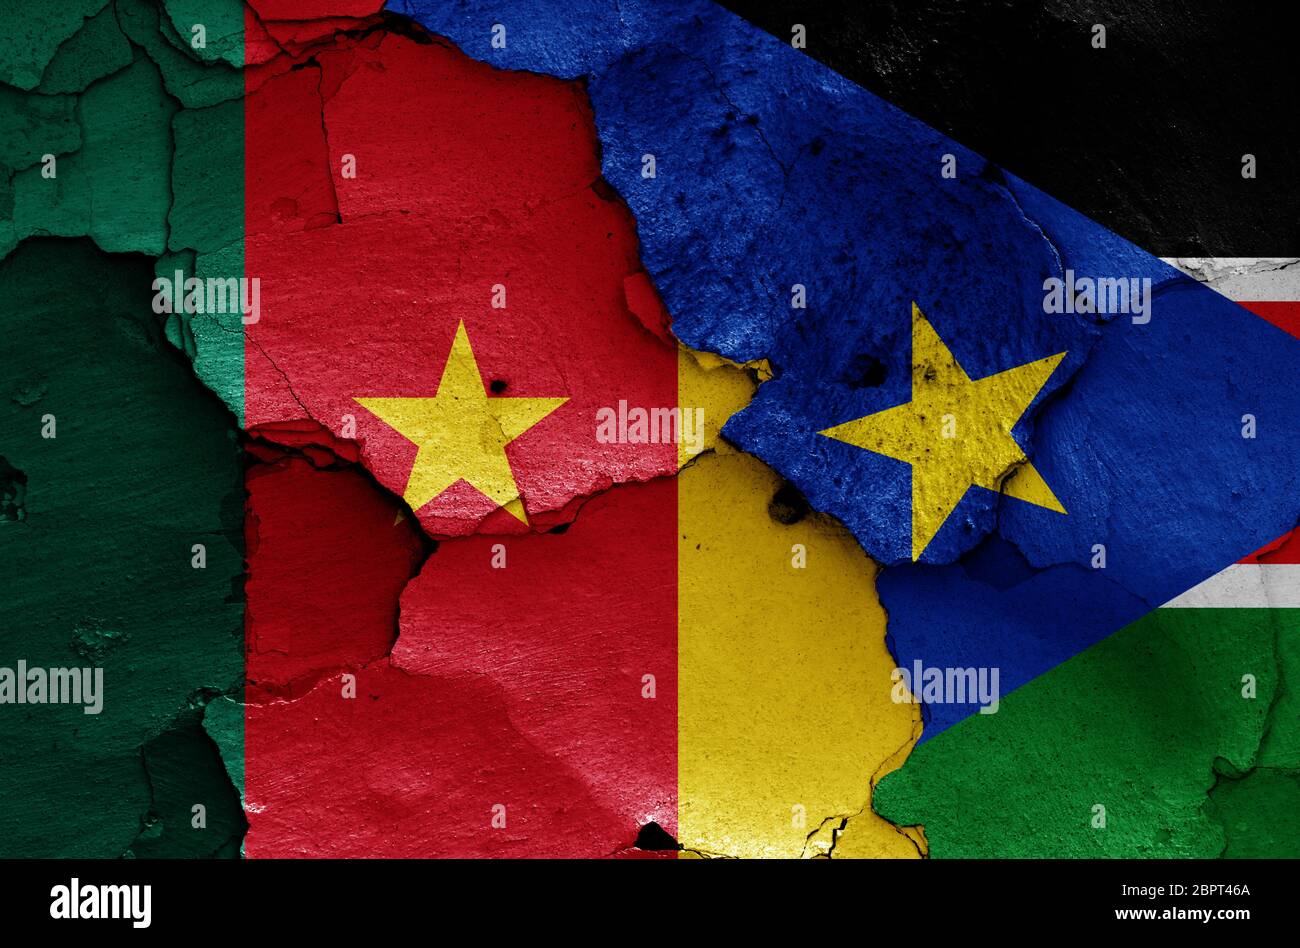 flags of Cameroon and South Sudan painted on cracked wall Stock Photo